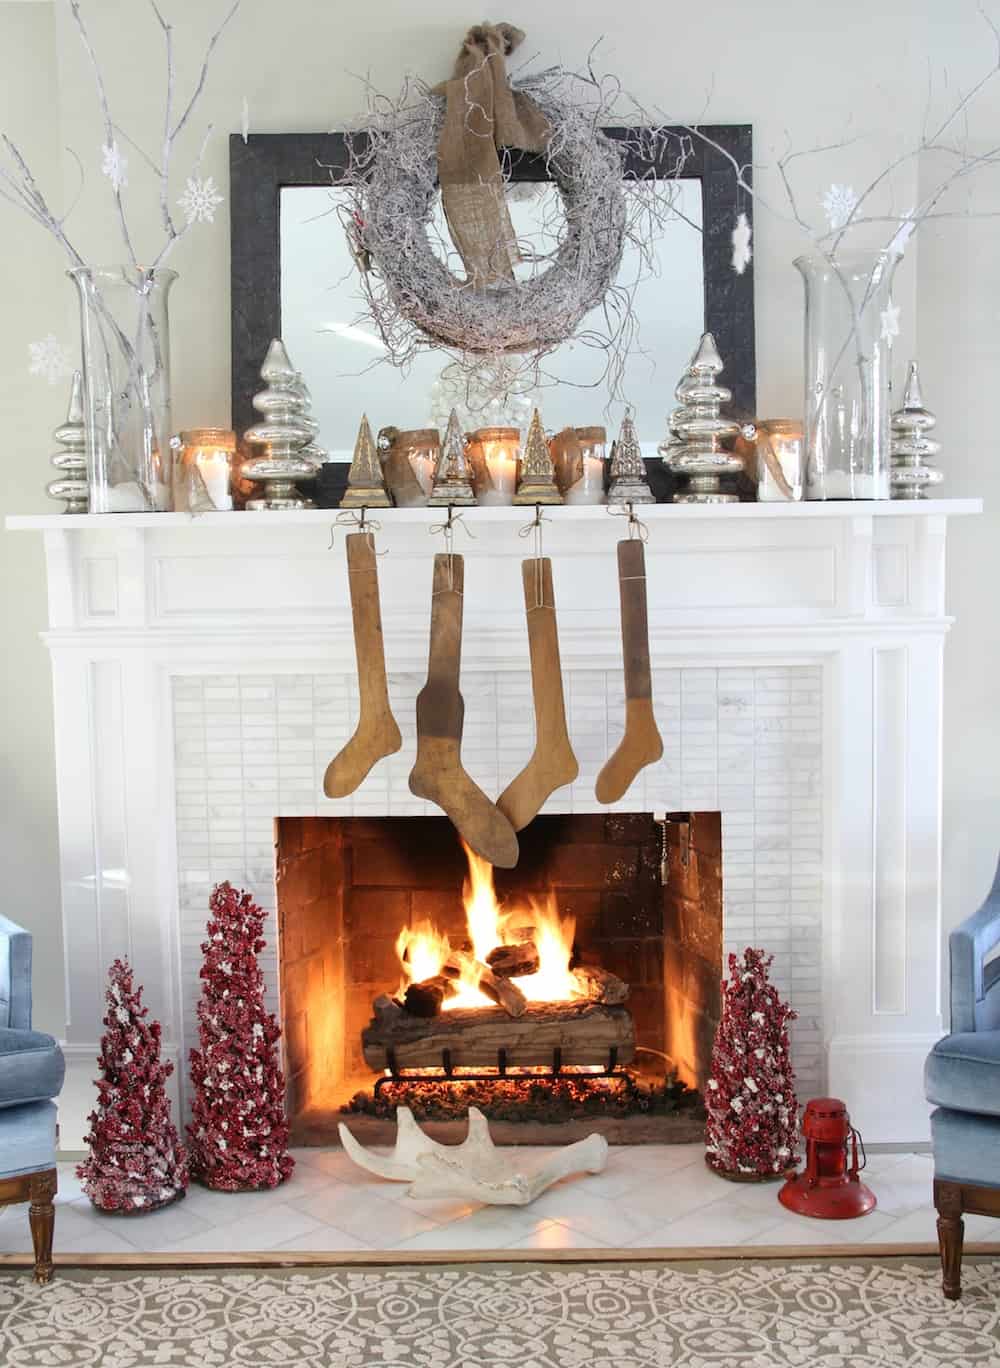 If you are going to have charming pieces this is the perfect time and space to decorate your home with holiday decor.